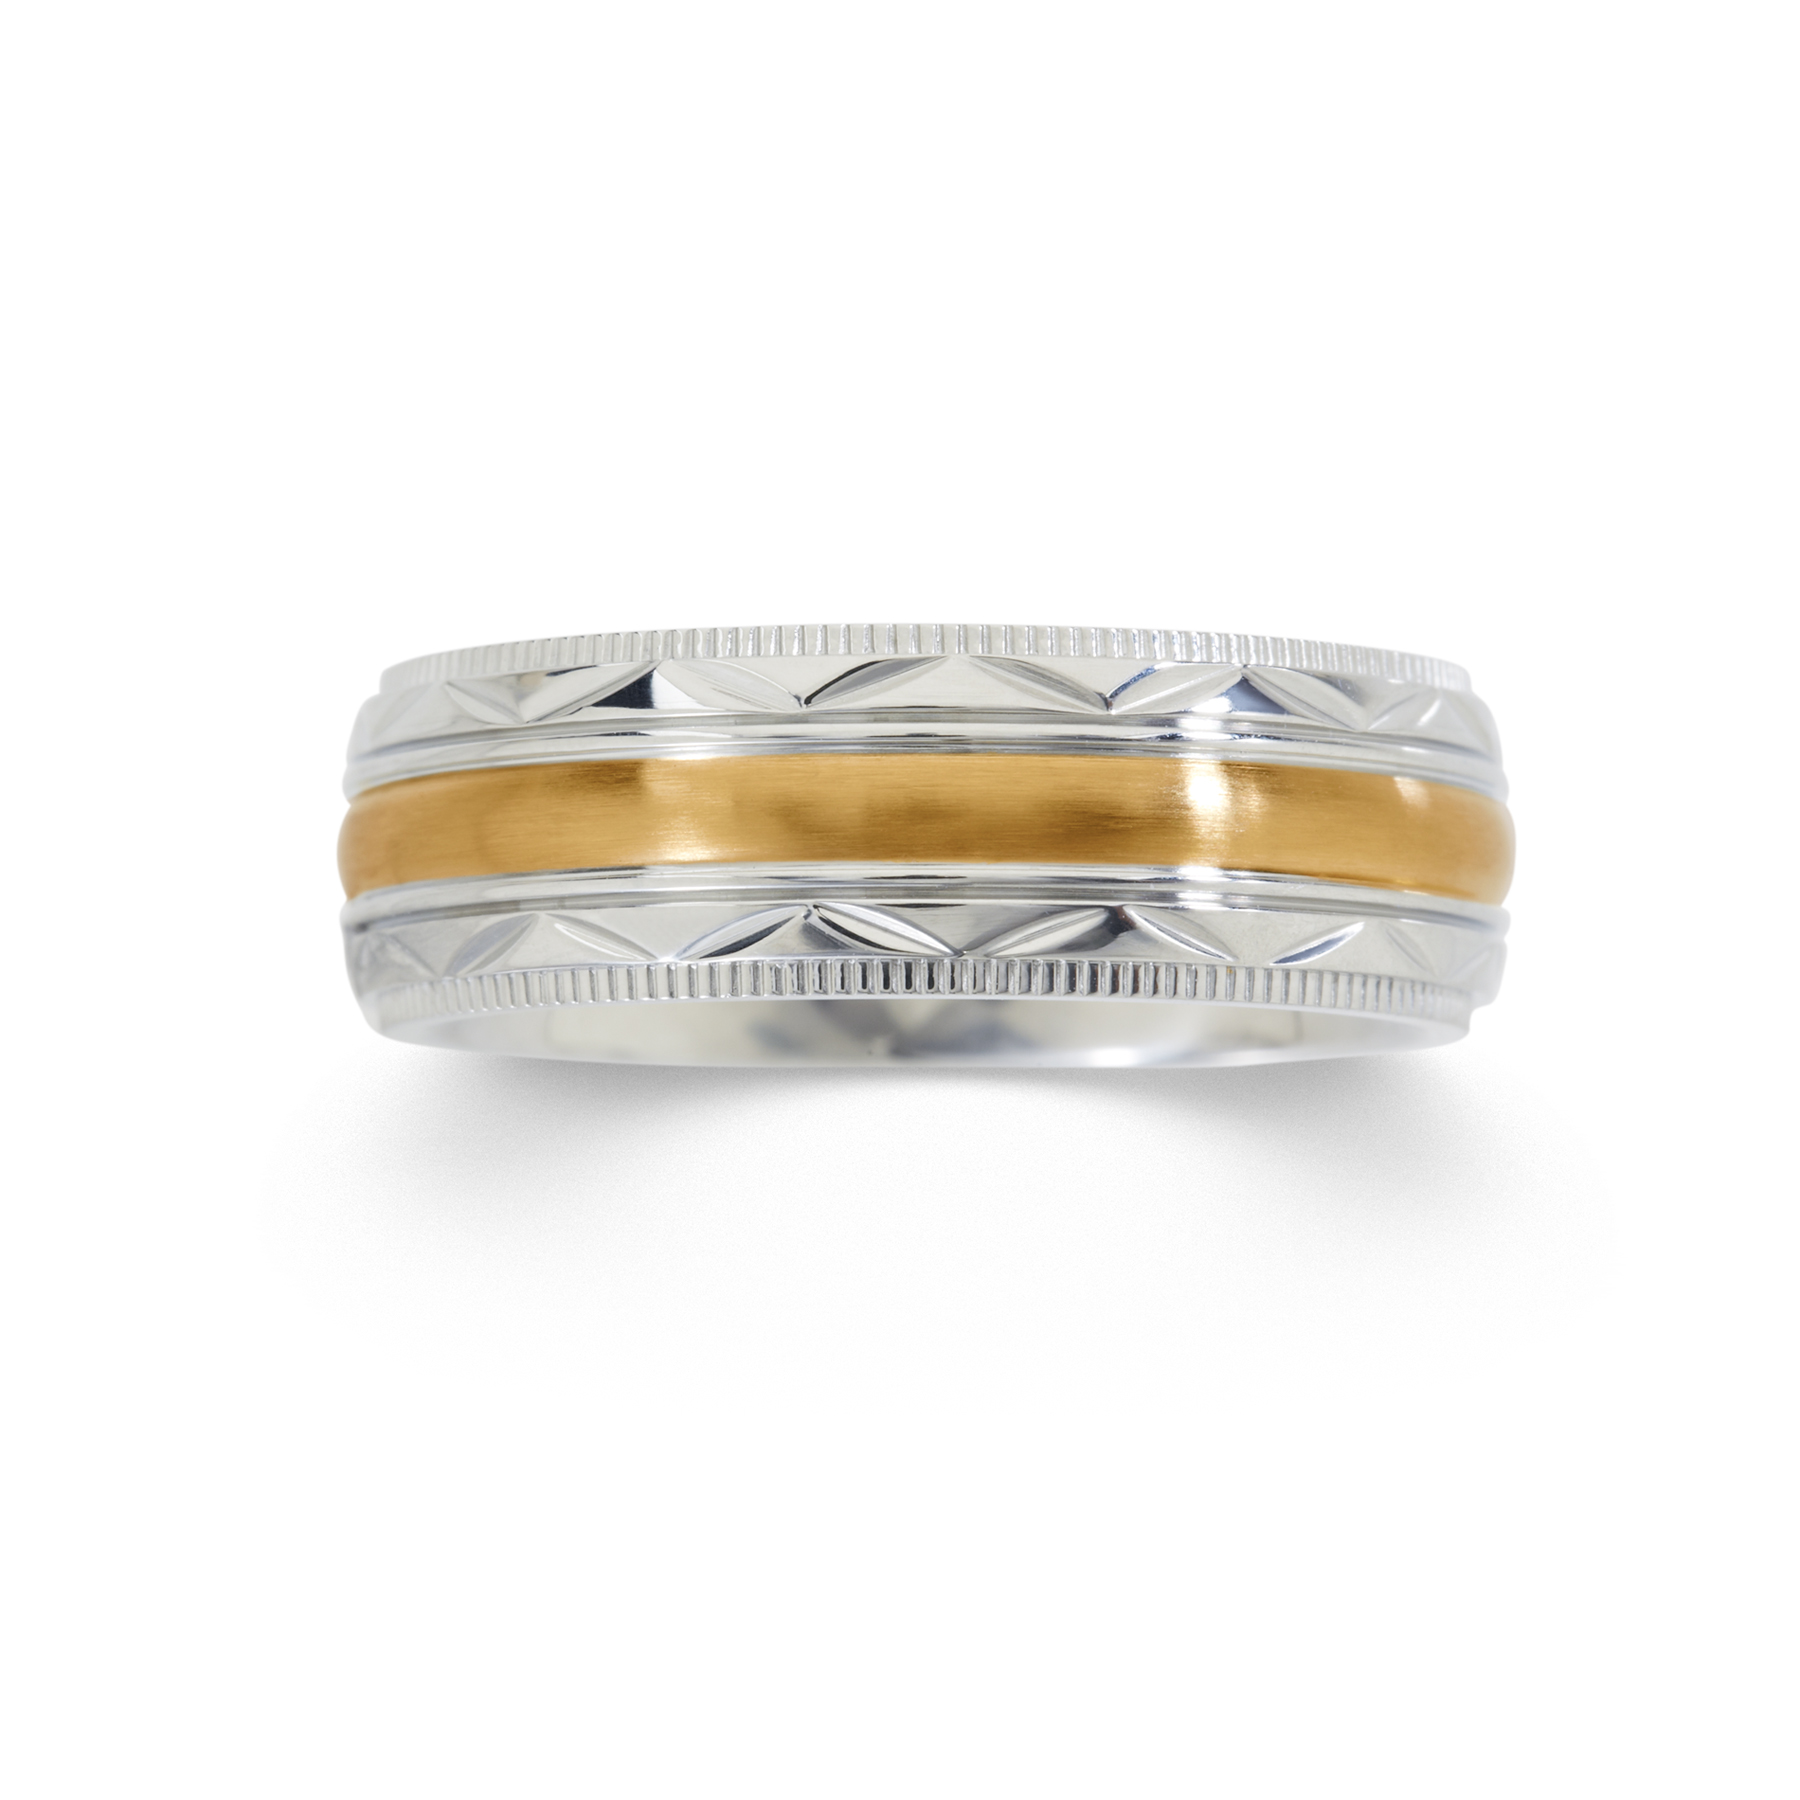 Men's Etched Gold PVD Stainless Steel Wedding Band